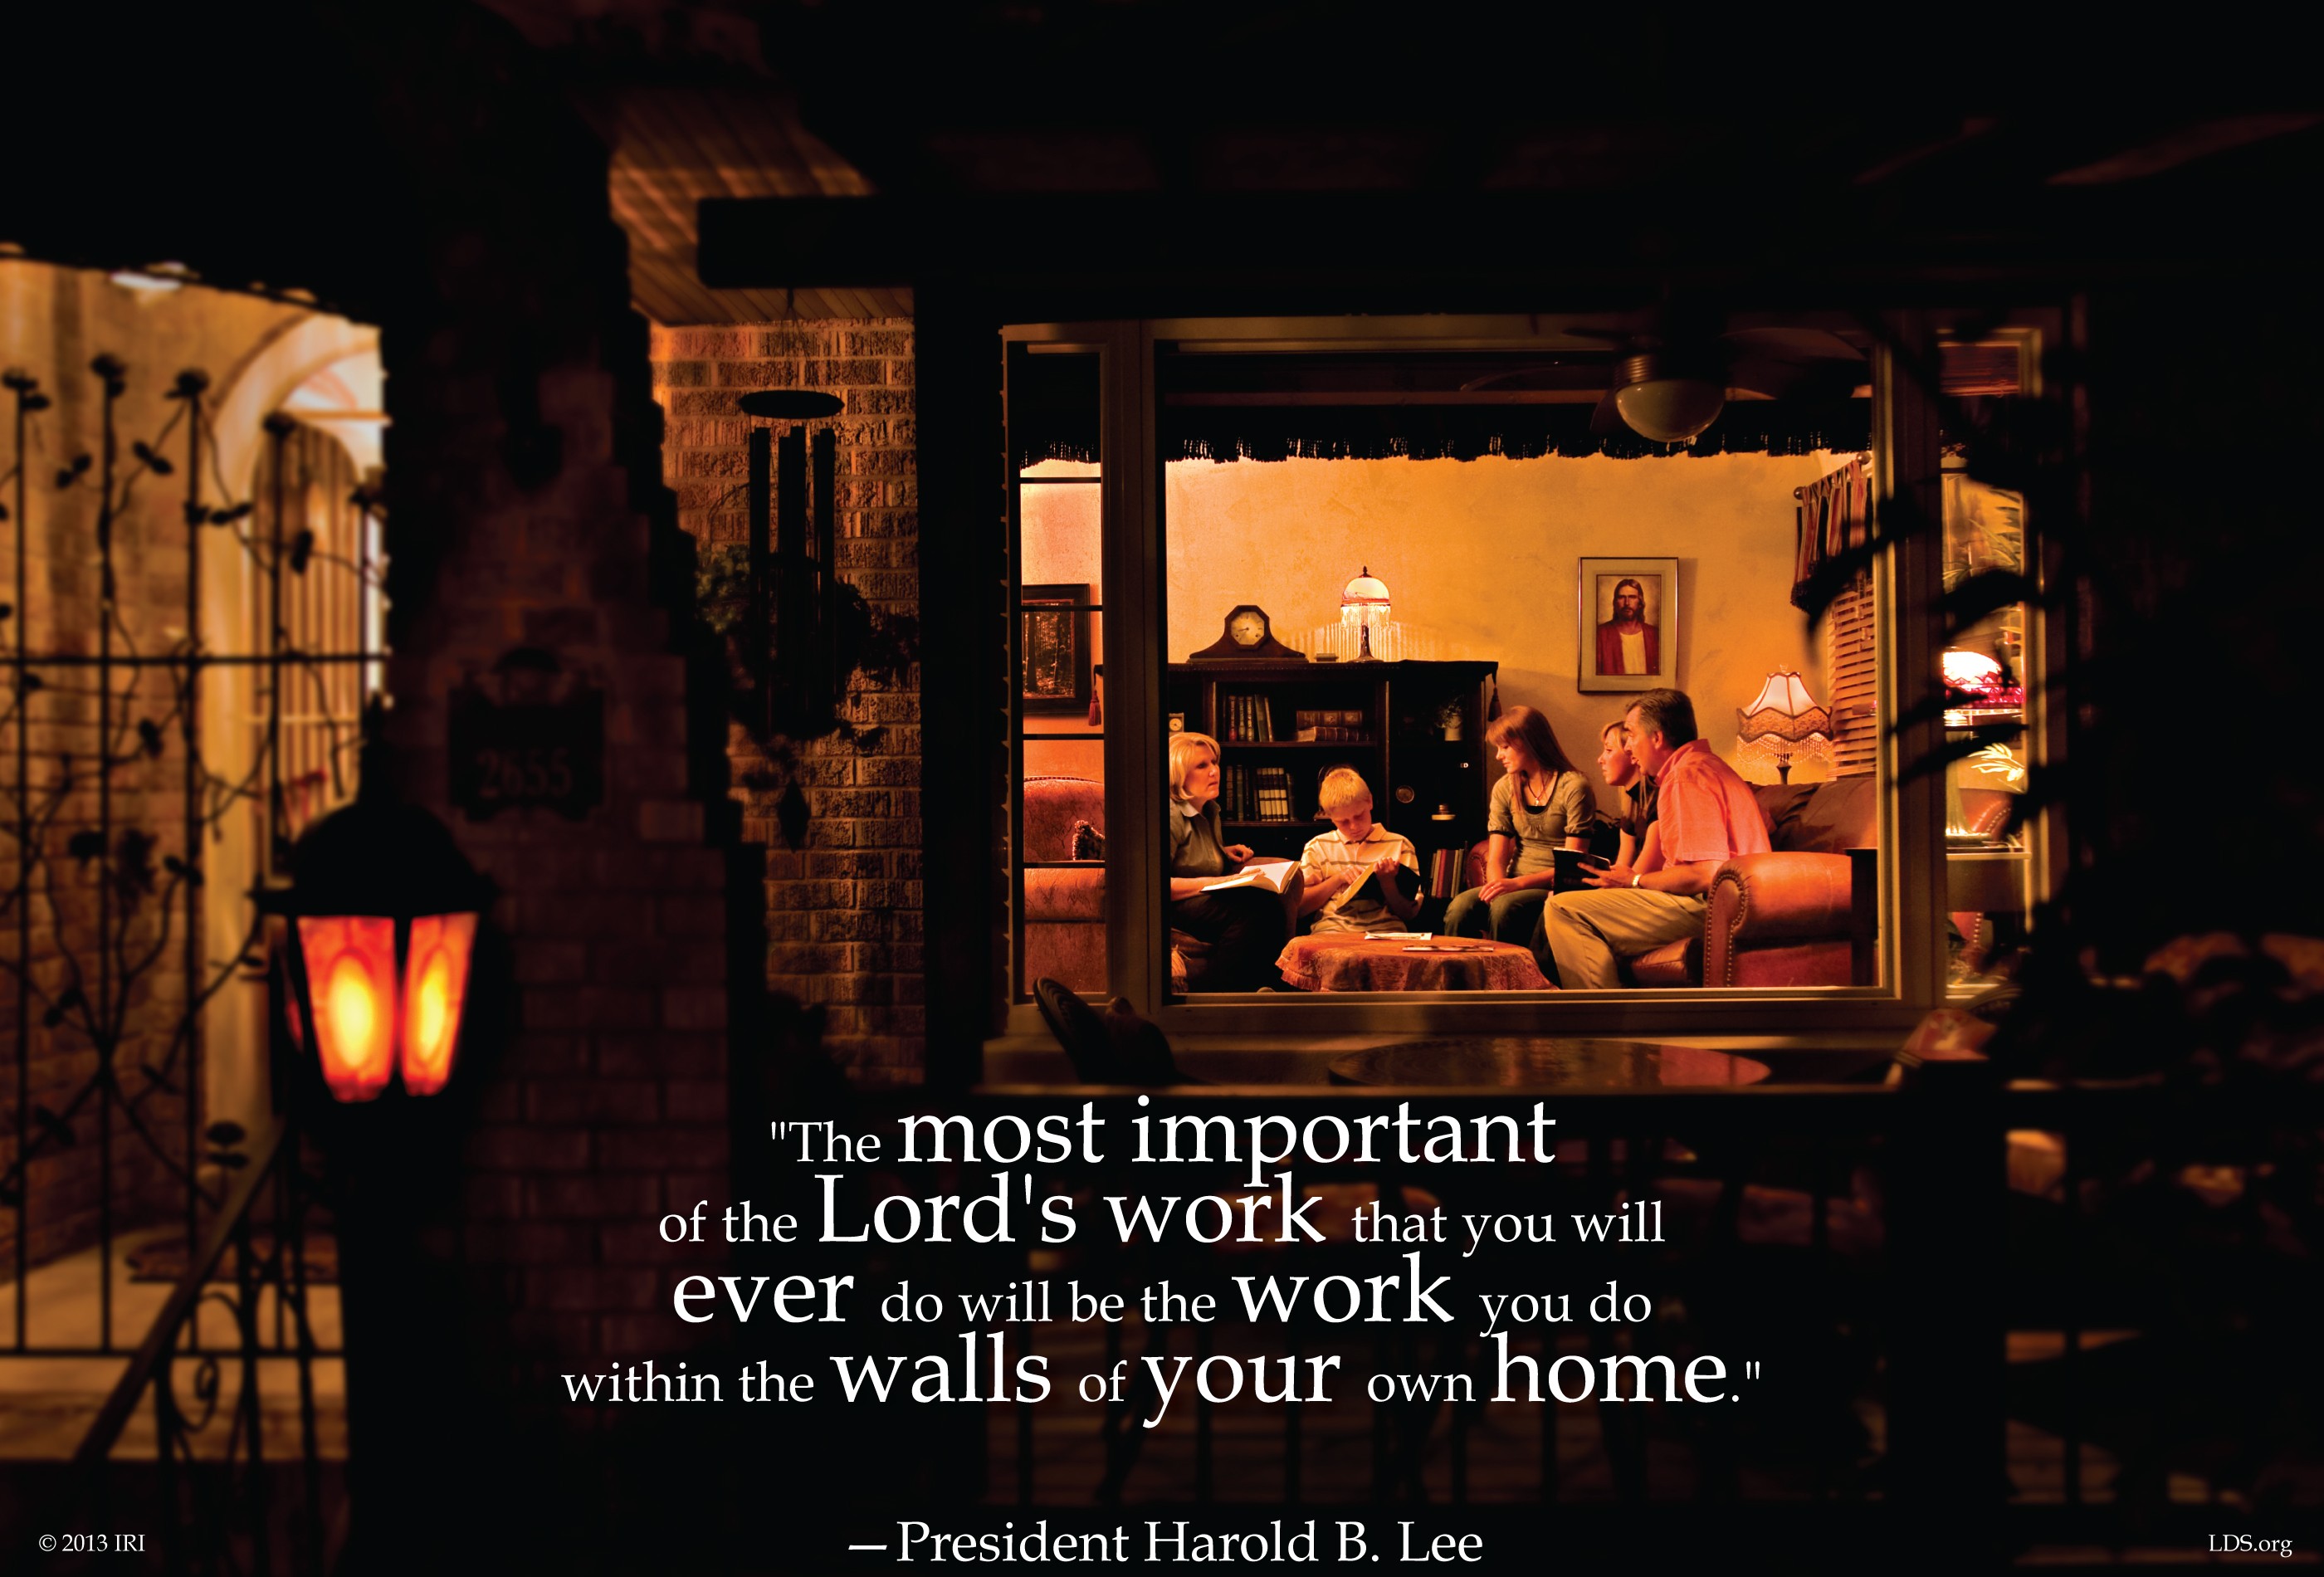 An image of a family in their house, coupled with a quote by Harold B. Lee, “The most important of the Lord’s work … will be within the walls of your own homes.”